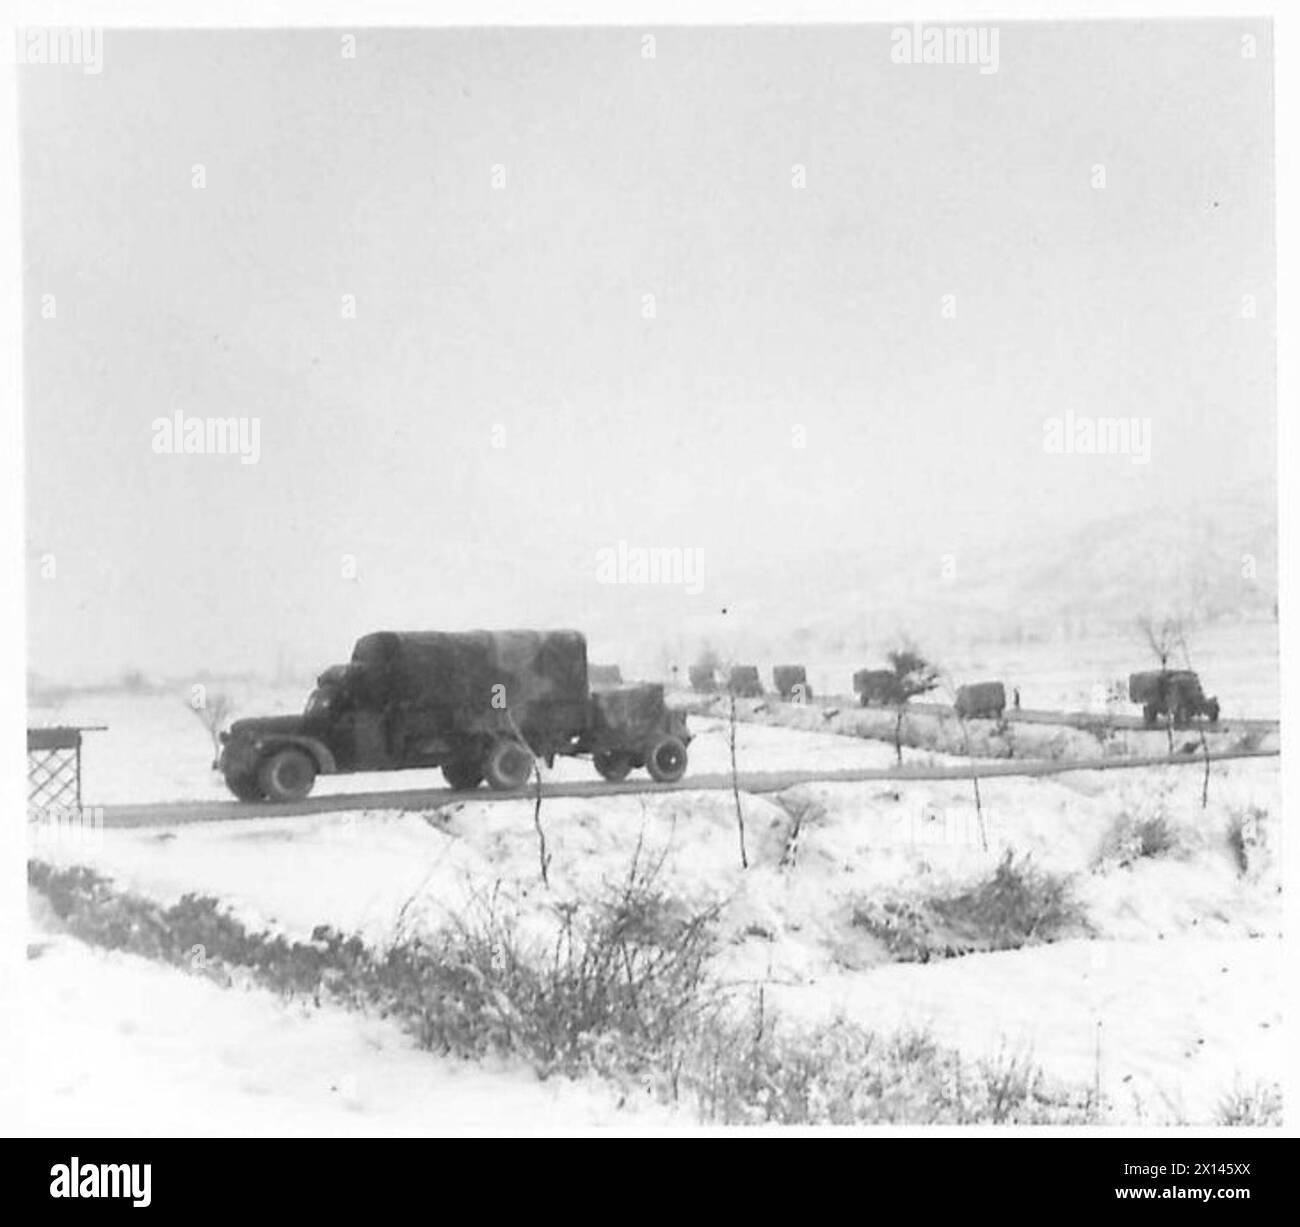 THE POLISH ARMY IN THE ITALIAN CAMPAIGN, 1943-1945 - A convoy of the 3rd Carpathian Rifles Division (2nd Polish Corps) trucks on the move on the Carpinone - Agnone road, 28/29 March 1944 Polish Army, Polish Armed Forces in the West, Polish Corps, II, Polish Armed Forces in the West, Carpathian Rifles Divisior, 3, 8th Army Stock Photo